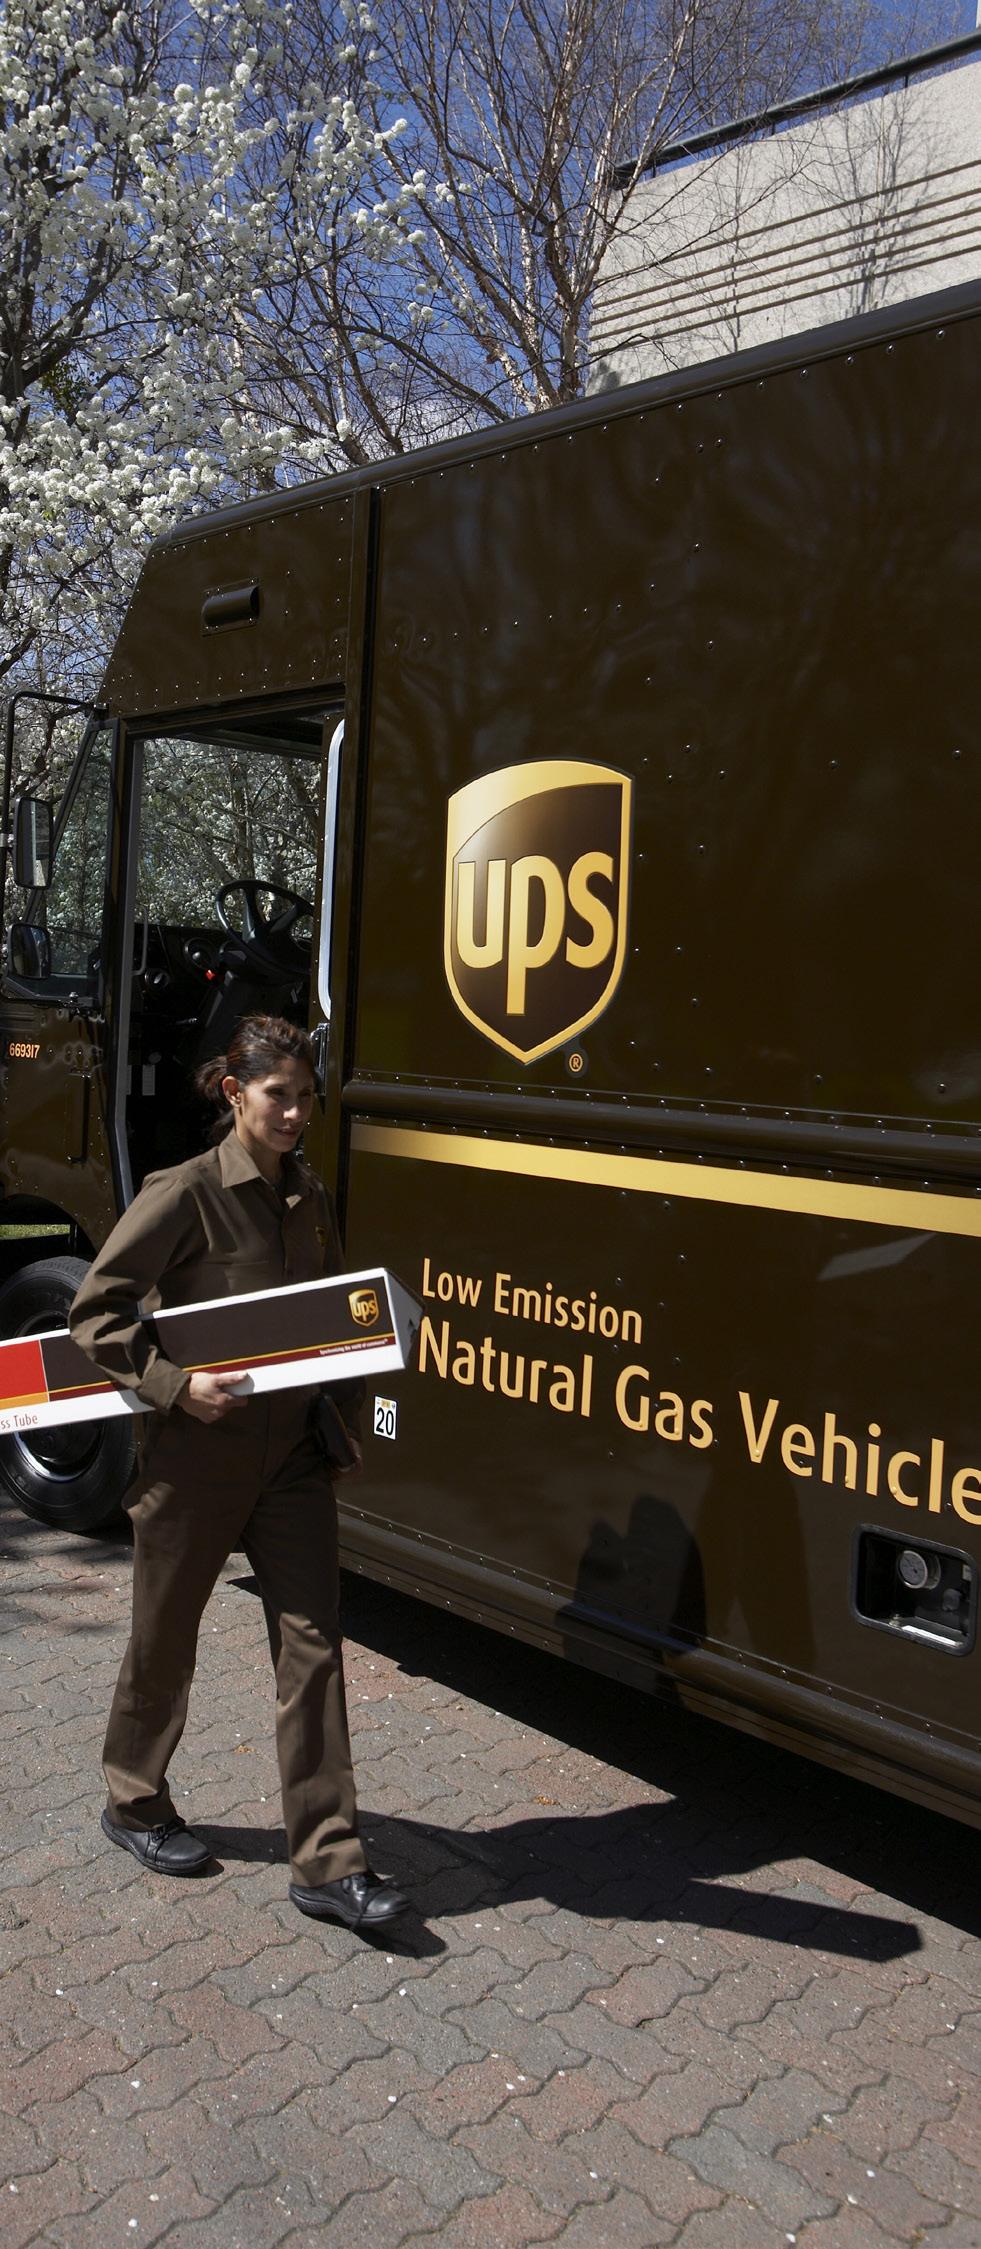 UPS Alternative Fuel and Advanced Technology Vehicles UPS operates one of the largest private alternative fuel and advanced technology fleets in the U.S. with more than 8,500 vehicles.